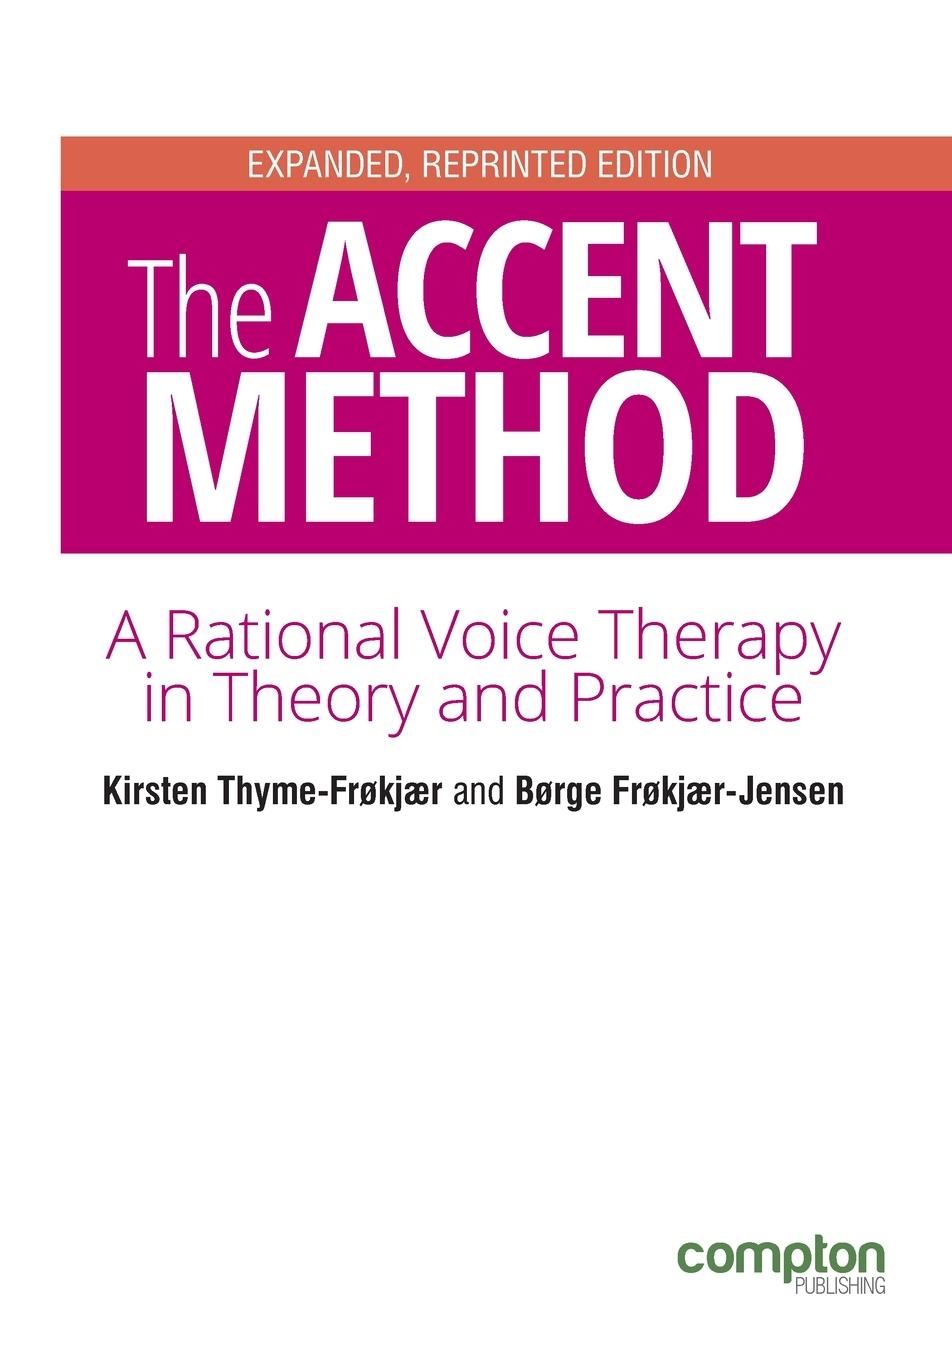 Carte Accent Method of Voice Therapy Kirsten Thyme-Frokjaer